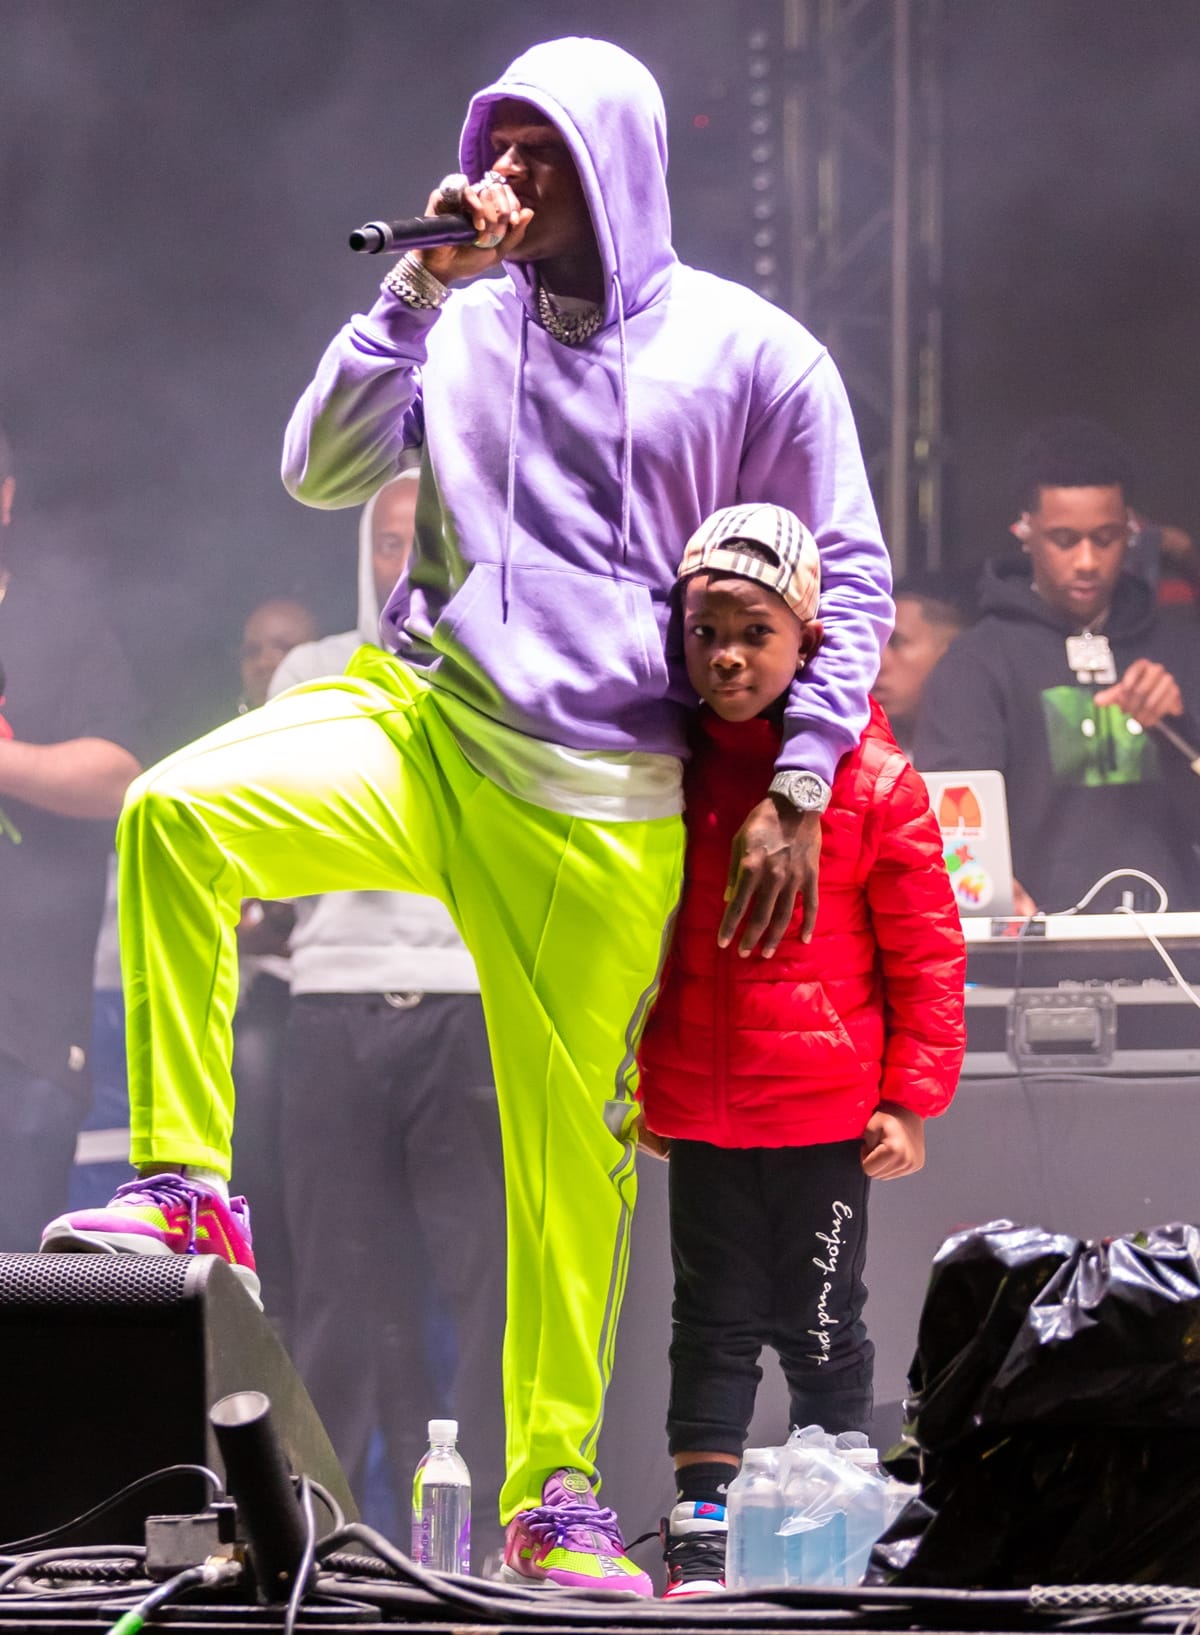 Rapper DaBaby performs with his son on stage at Vewtopia Music Festival 2020